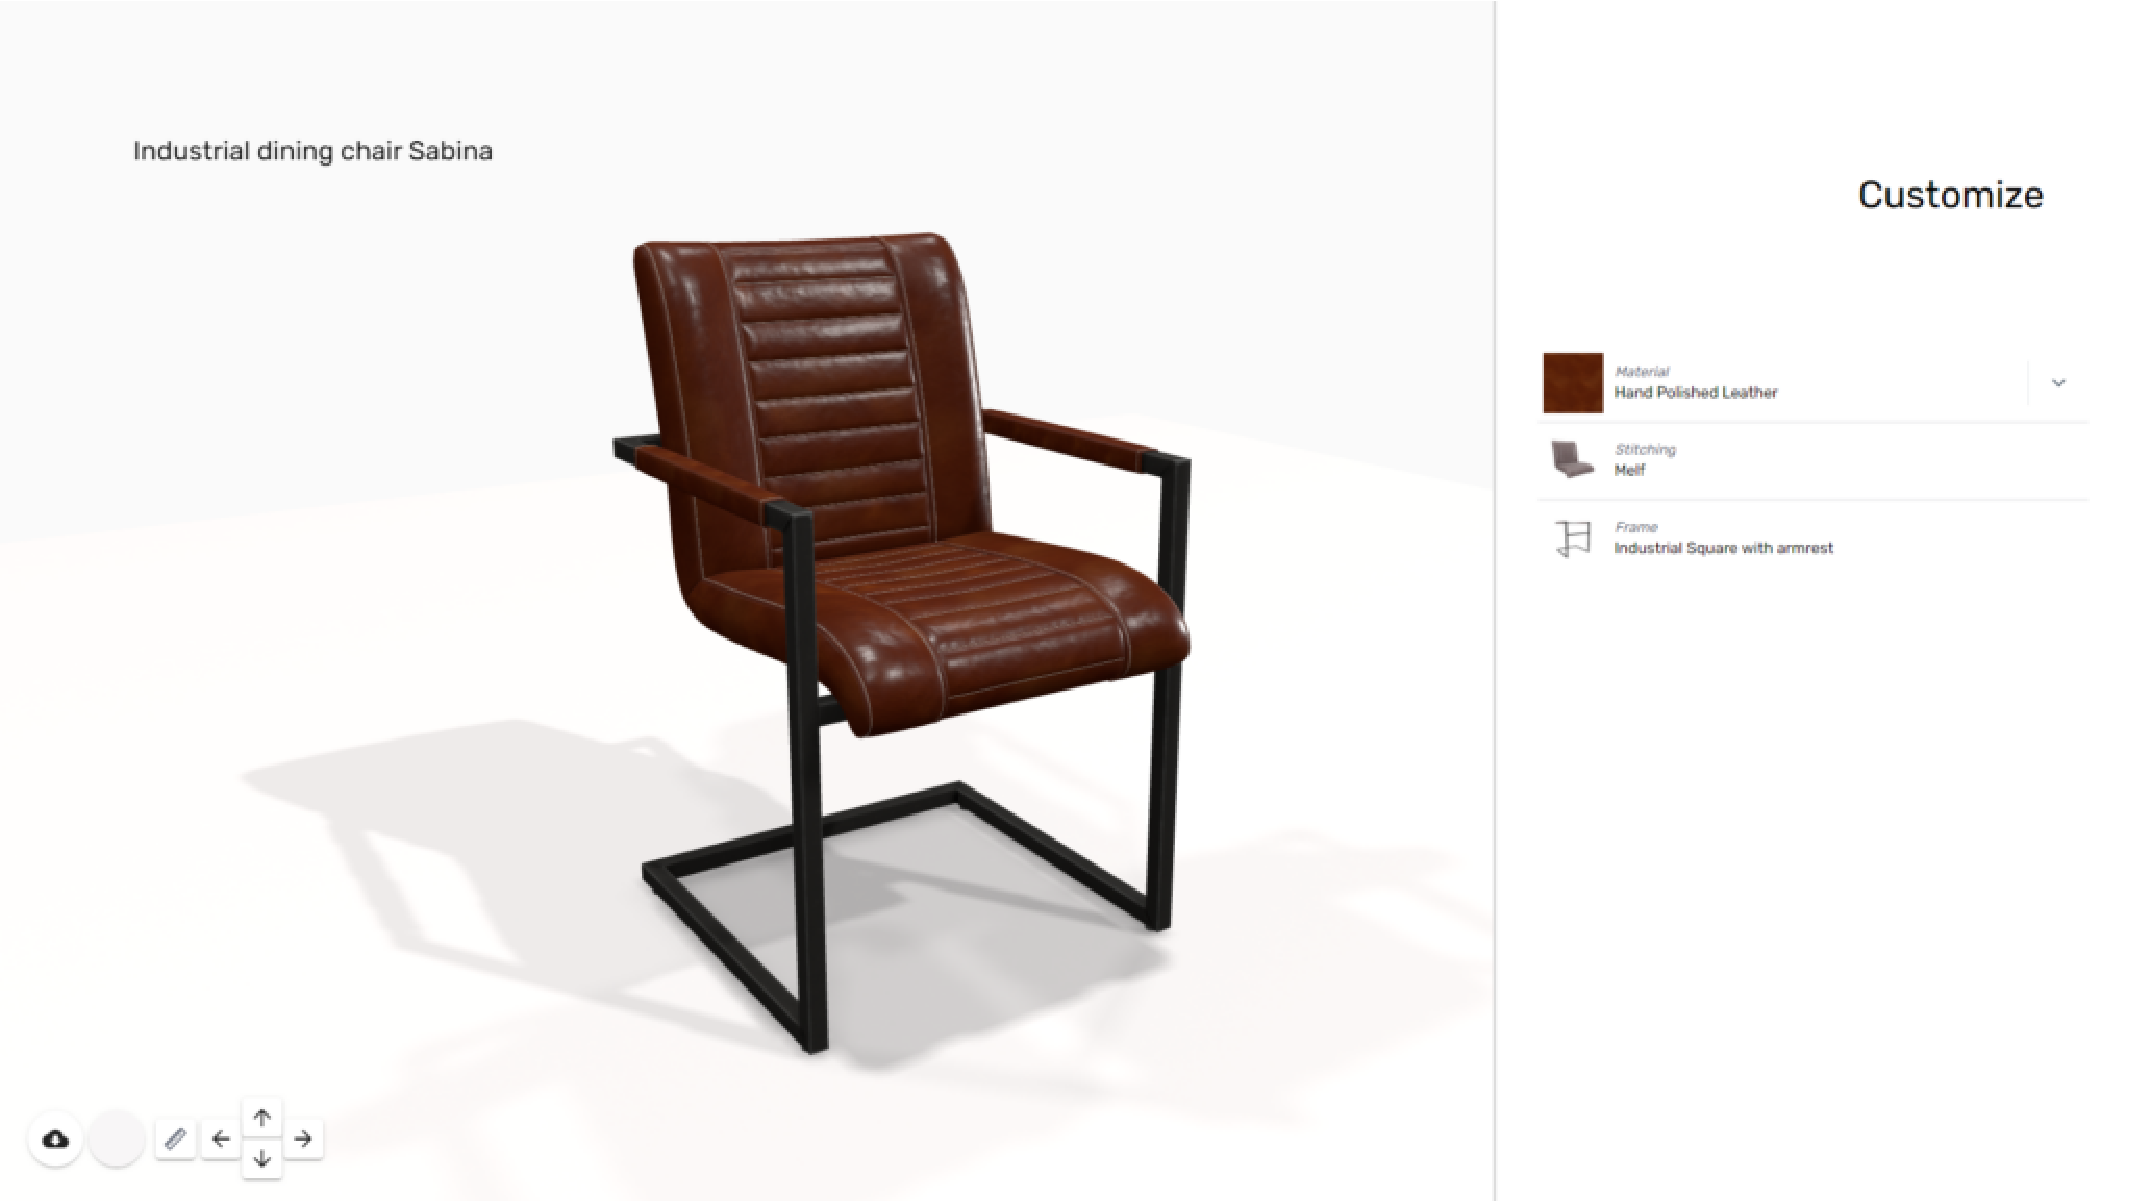 augmented reality for furniture seating configuration